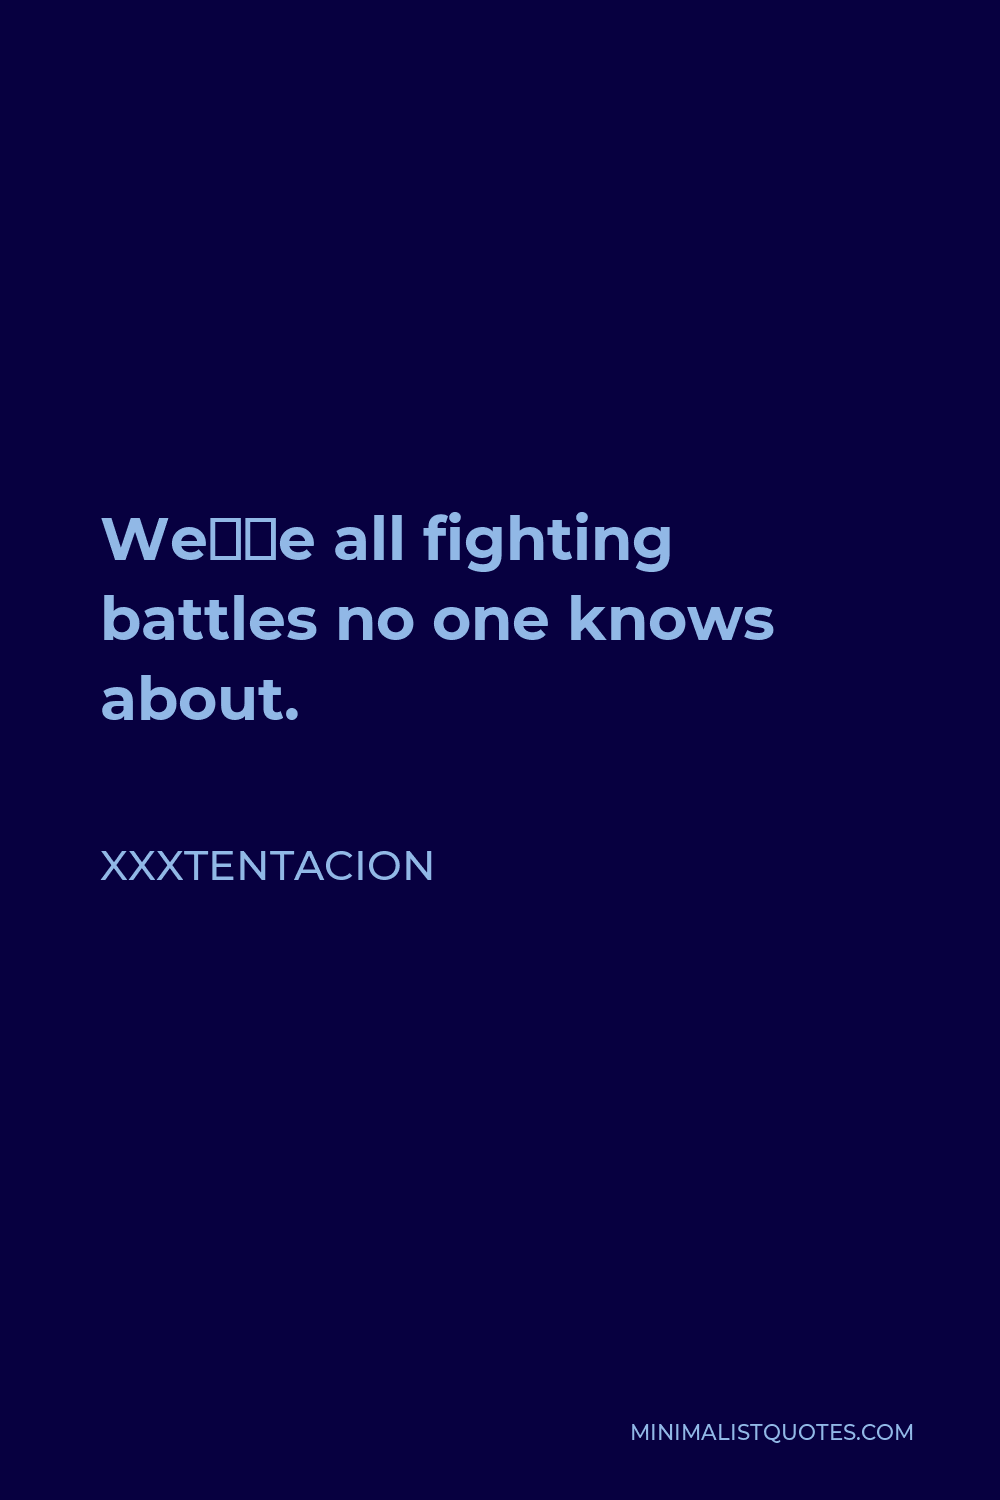 Xxxtentacion Quote - We’re all fighting battles no one knows about.